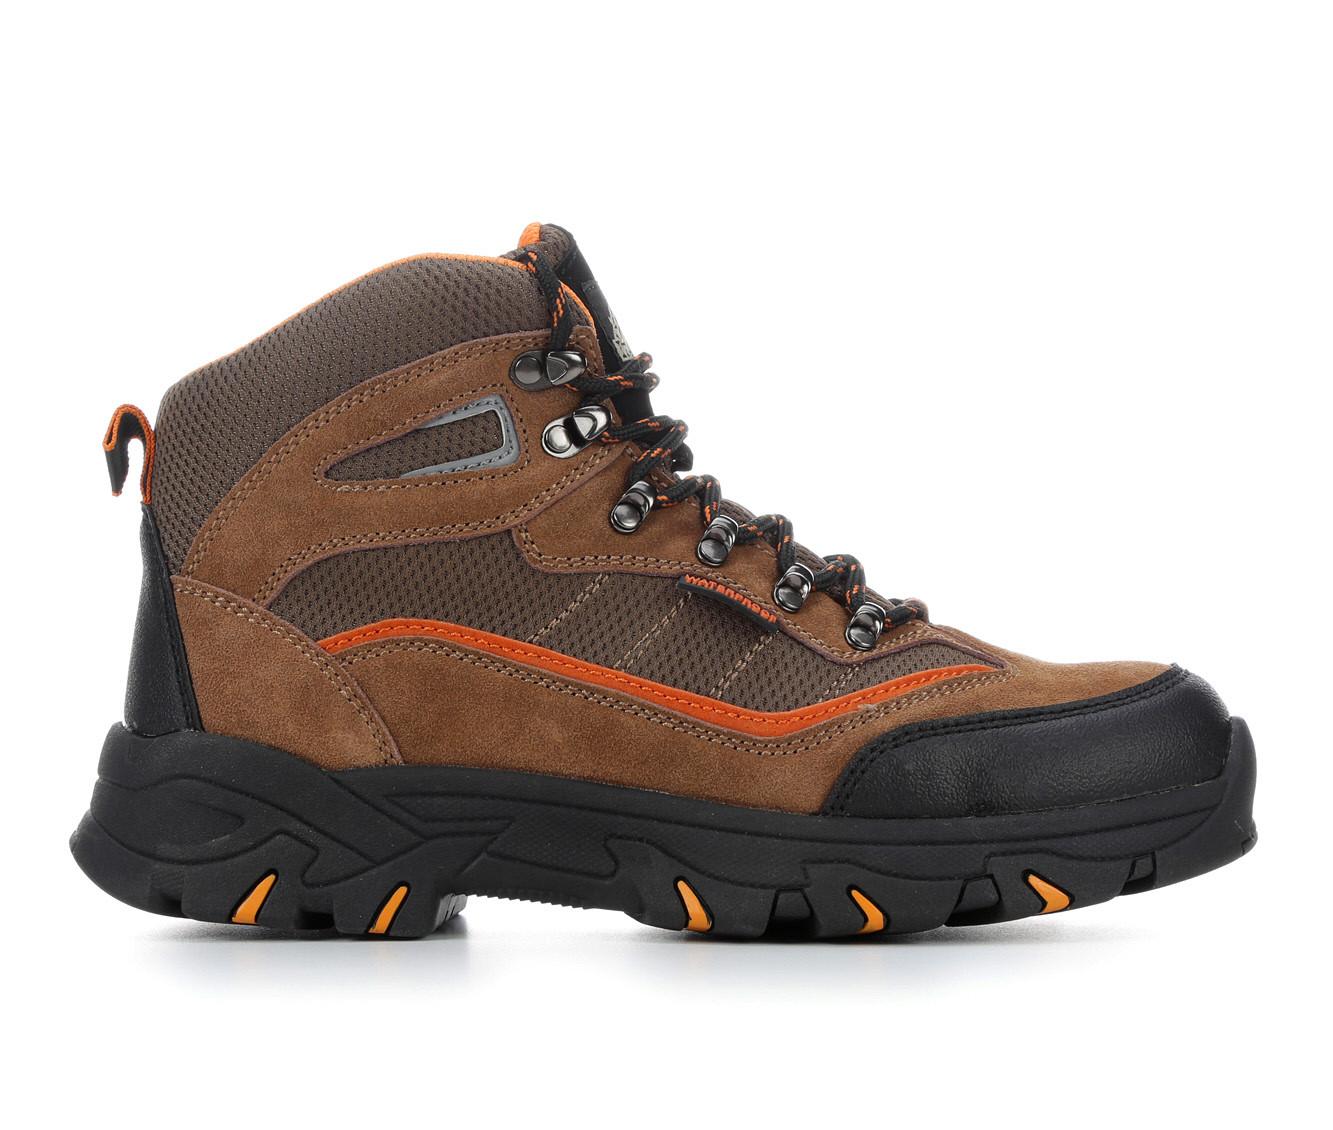 Men's Itasca Sonoma Andes Hiking Boots